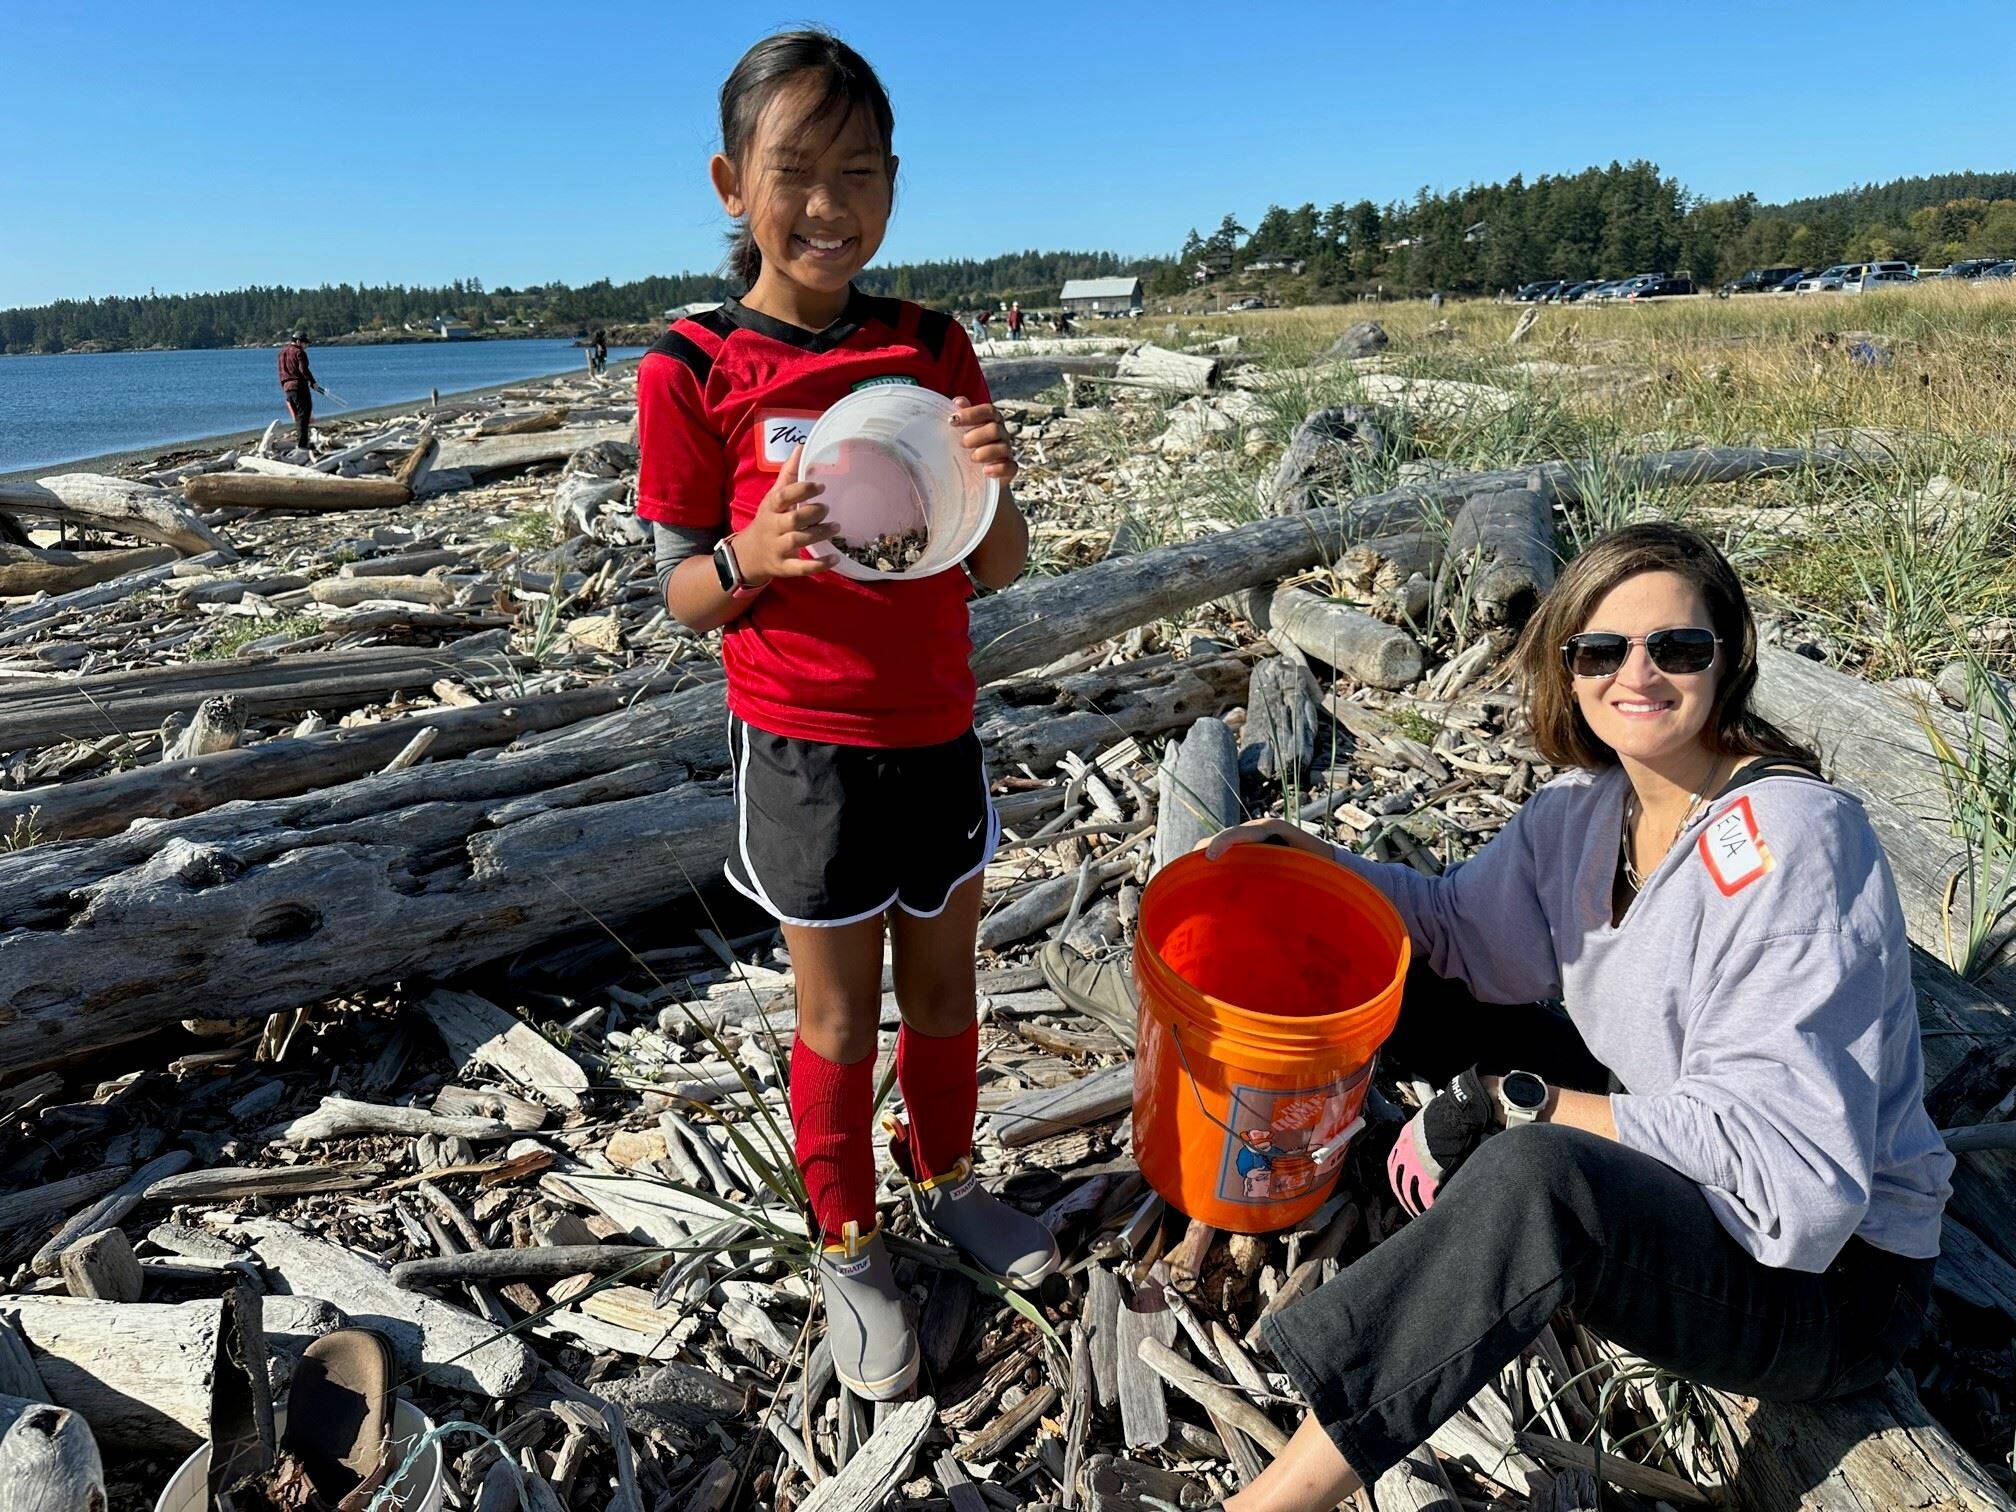 Contributed photo by San Juan County
Volunteers find microplastics at Jackson Beach